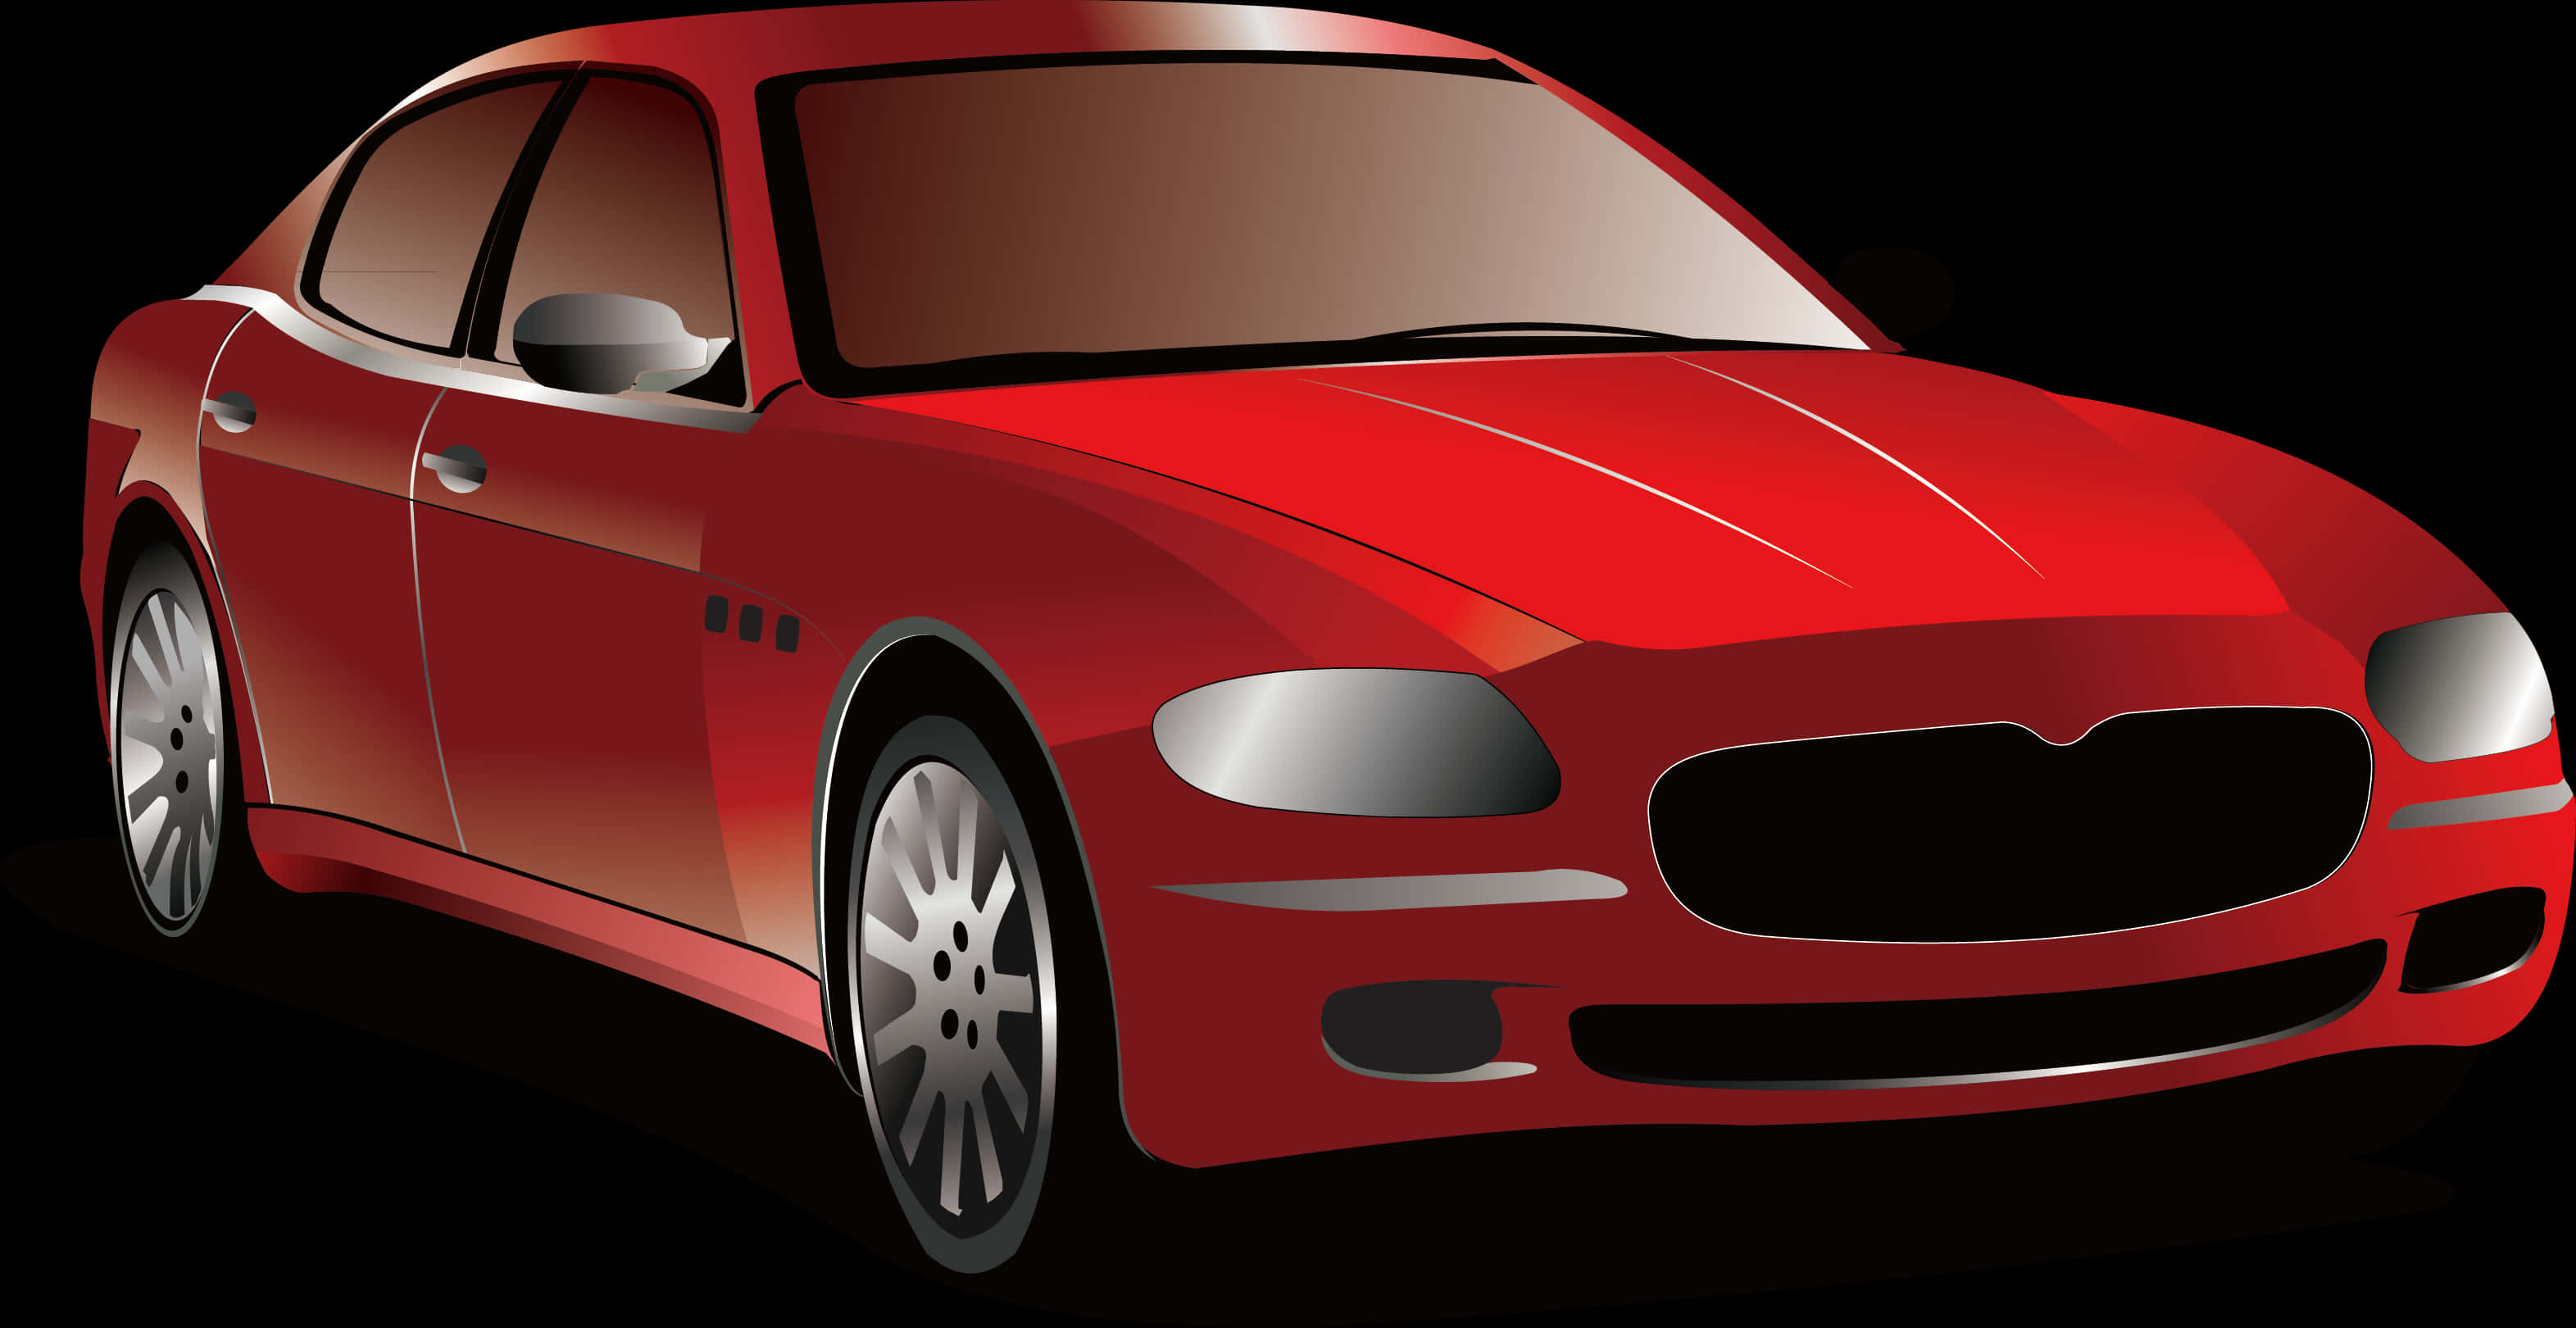 A Red Car With A Black Background